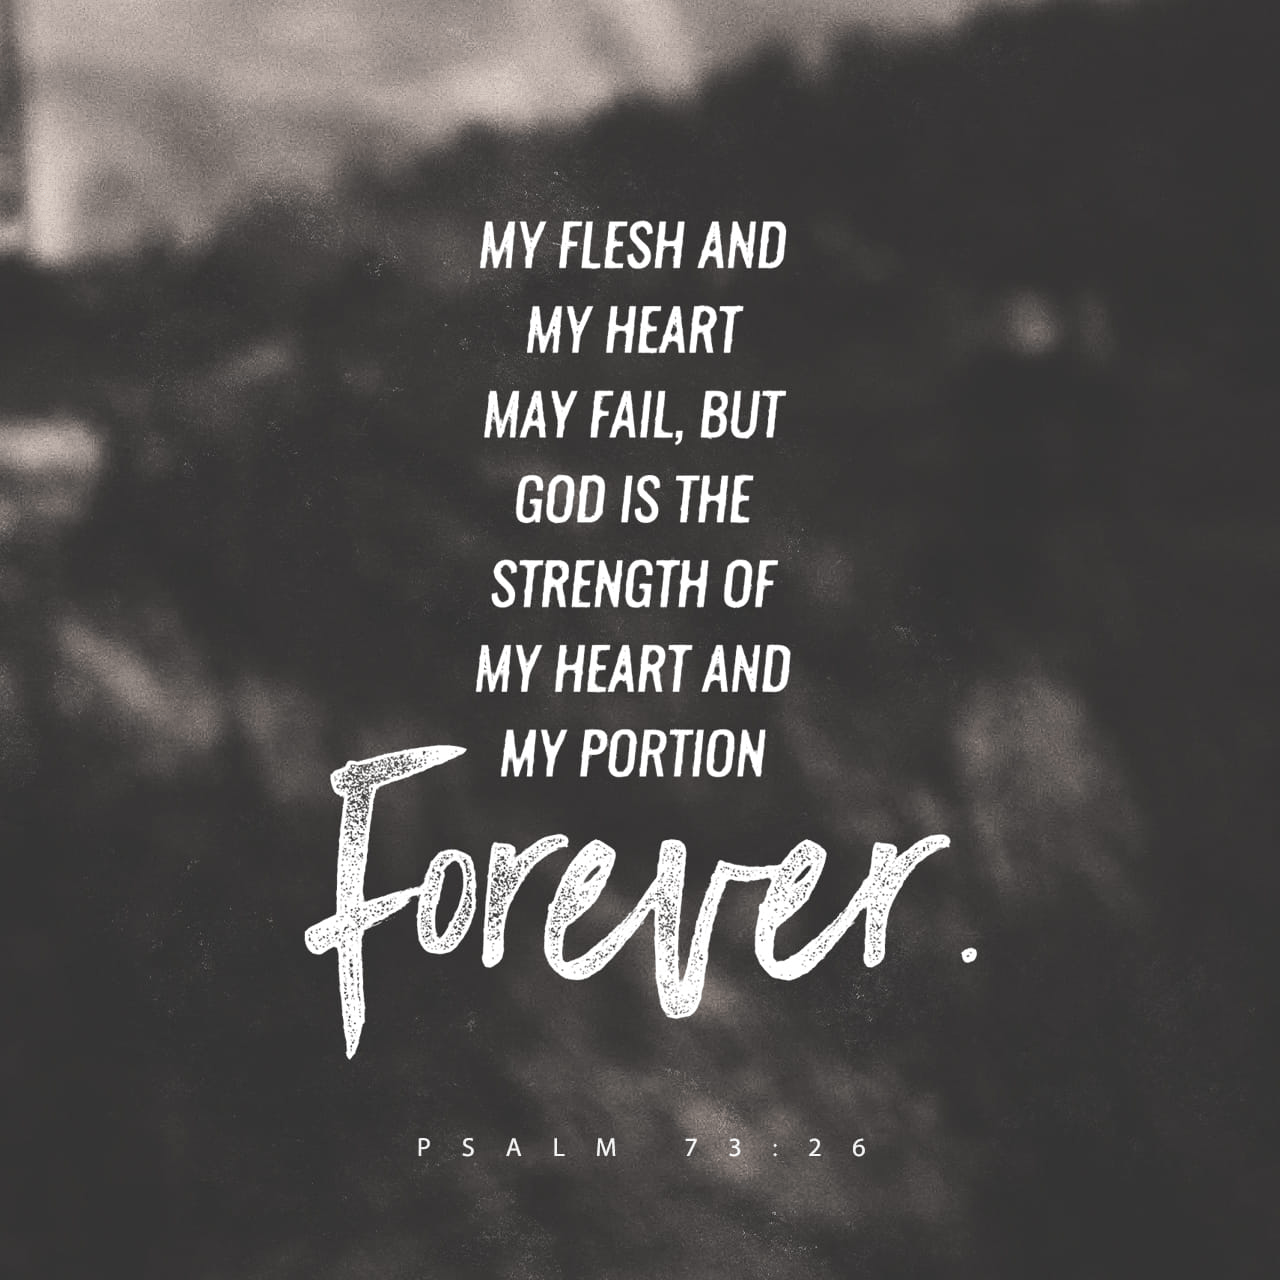 VOTD February 15 - “My flesh and my heart may fail, But God is the strength of my heart and my portion forever.” ‭‭Psalms‬ ‭73:26‬ ‭NASB‬‬